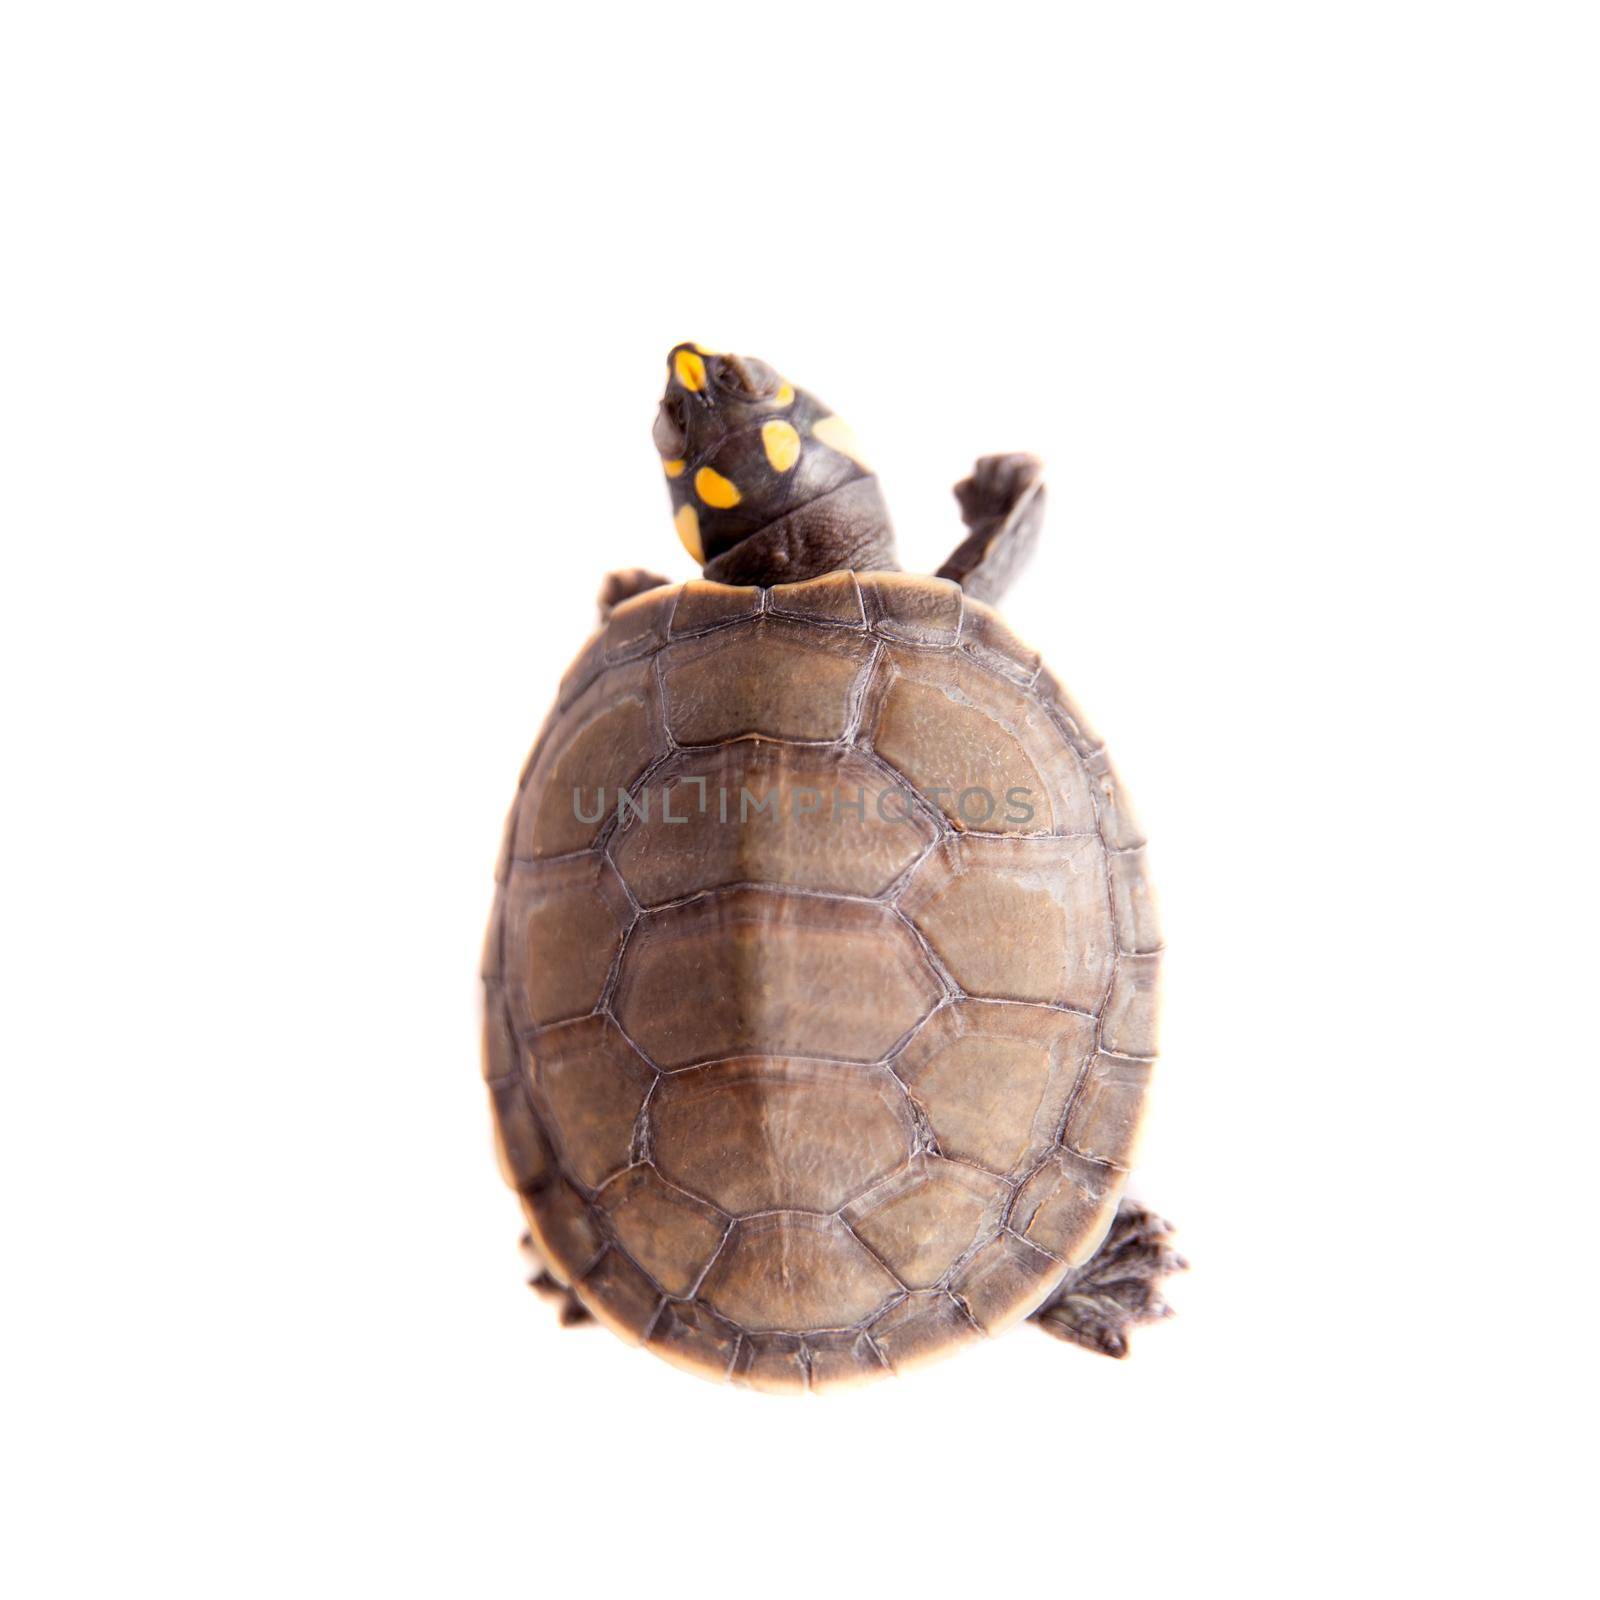 Yellow-spotted Amazon River Turtle, Podocnemis unifilis, isolated on white